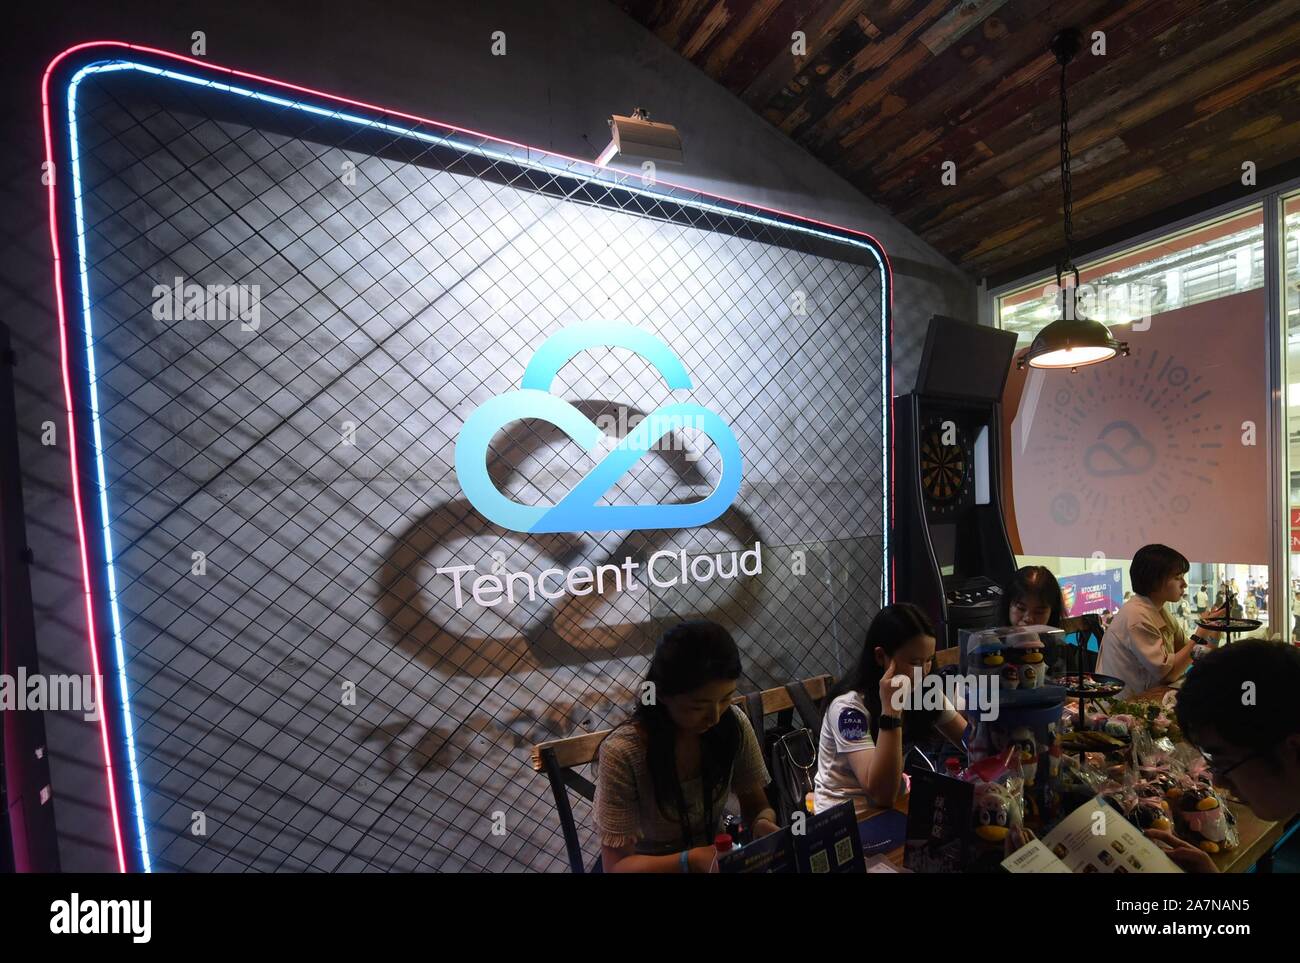 People visit a cafe launched by Tencent Cloud during the 17th China Digital Entertainment Expo, also known as ChinaJoy 2019, in Shanghai, China, 2 Aug Stock Photo